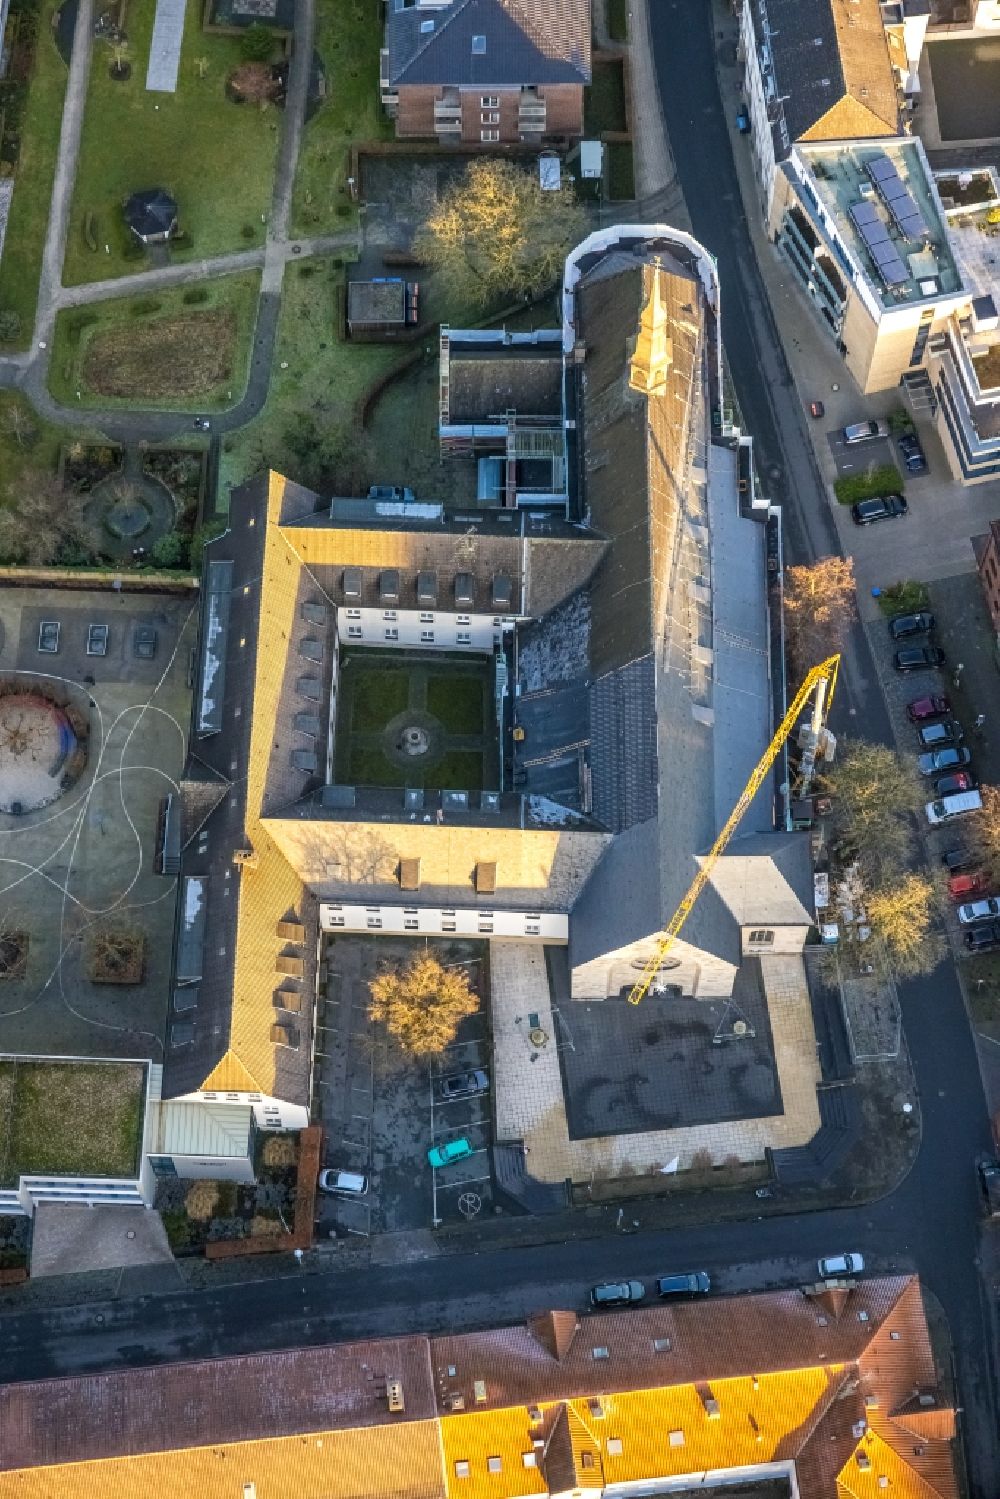 Aerial photograph Hamm - Construction site for renovation and reconstruction work on the church building St. Agnes Kirche on Bruederstrasse - Franziskanerstrasse in the district Heessen in Hamm at Ruhrgebiet in the state North Rhine-Westphalia, Germany